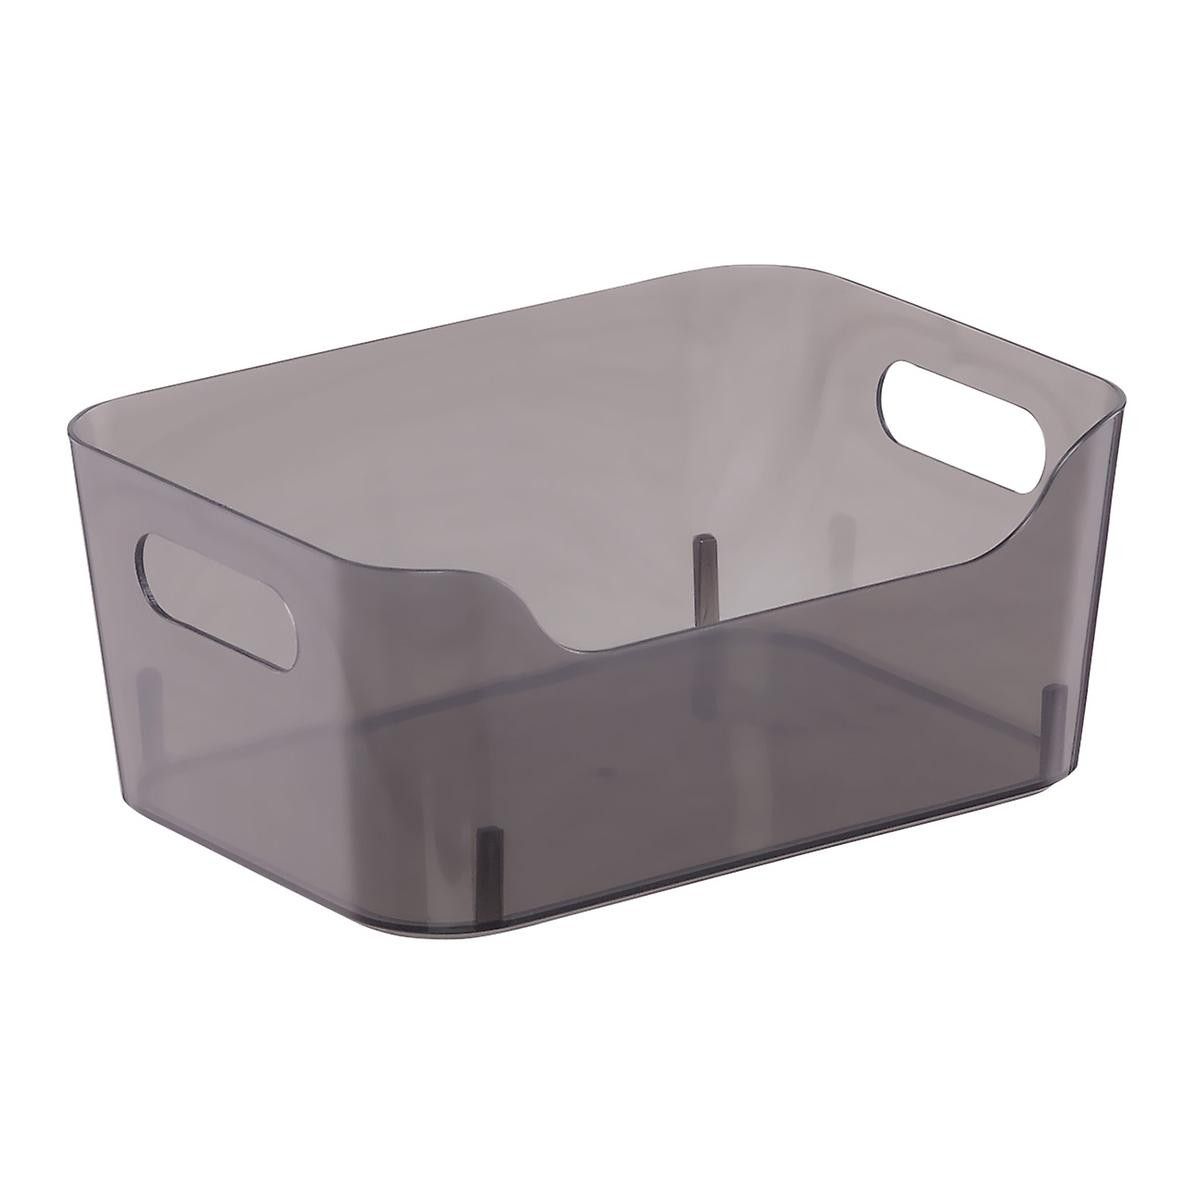 Large Plastic Storage Bin W/ Handles Smoke | The Container Store